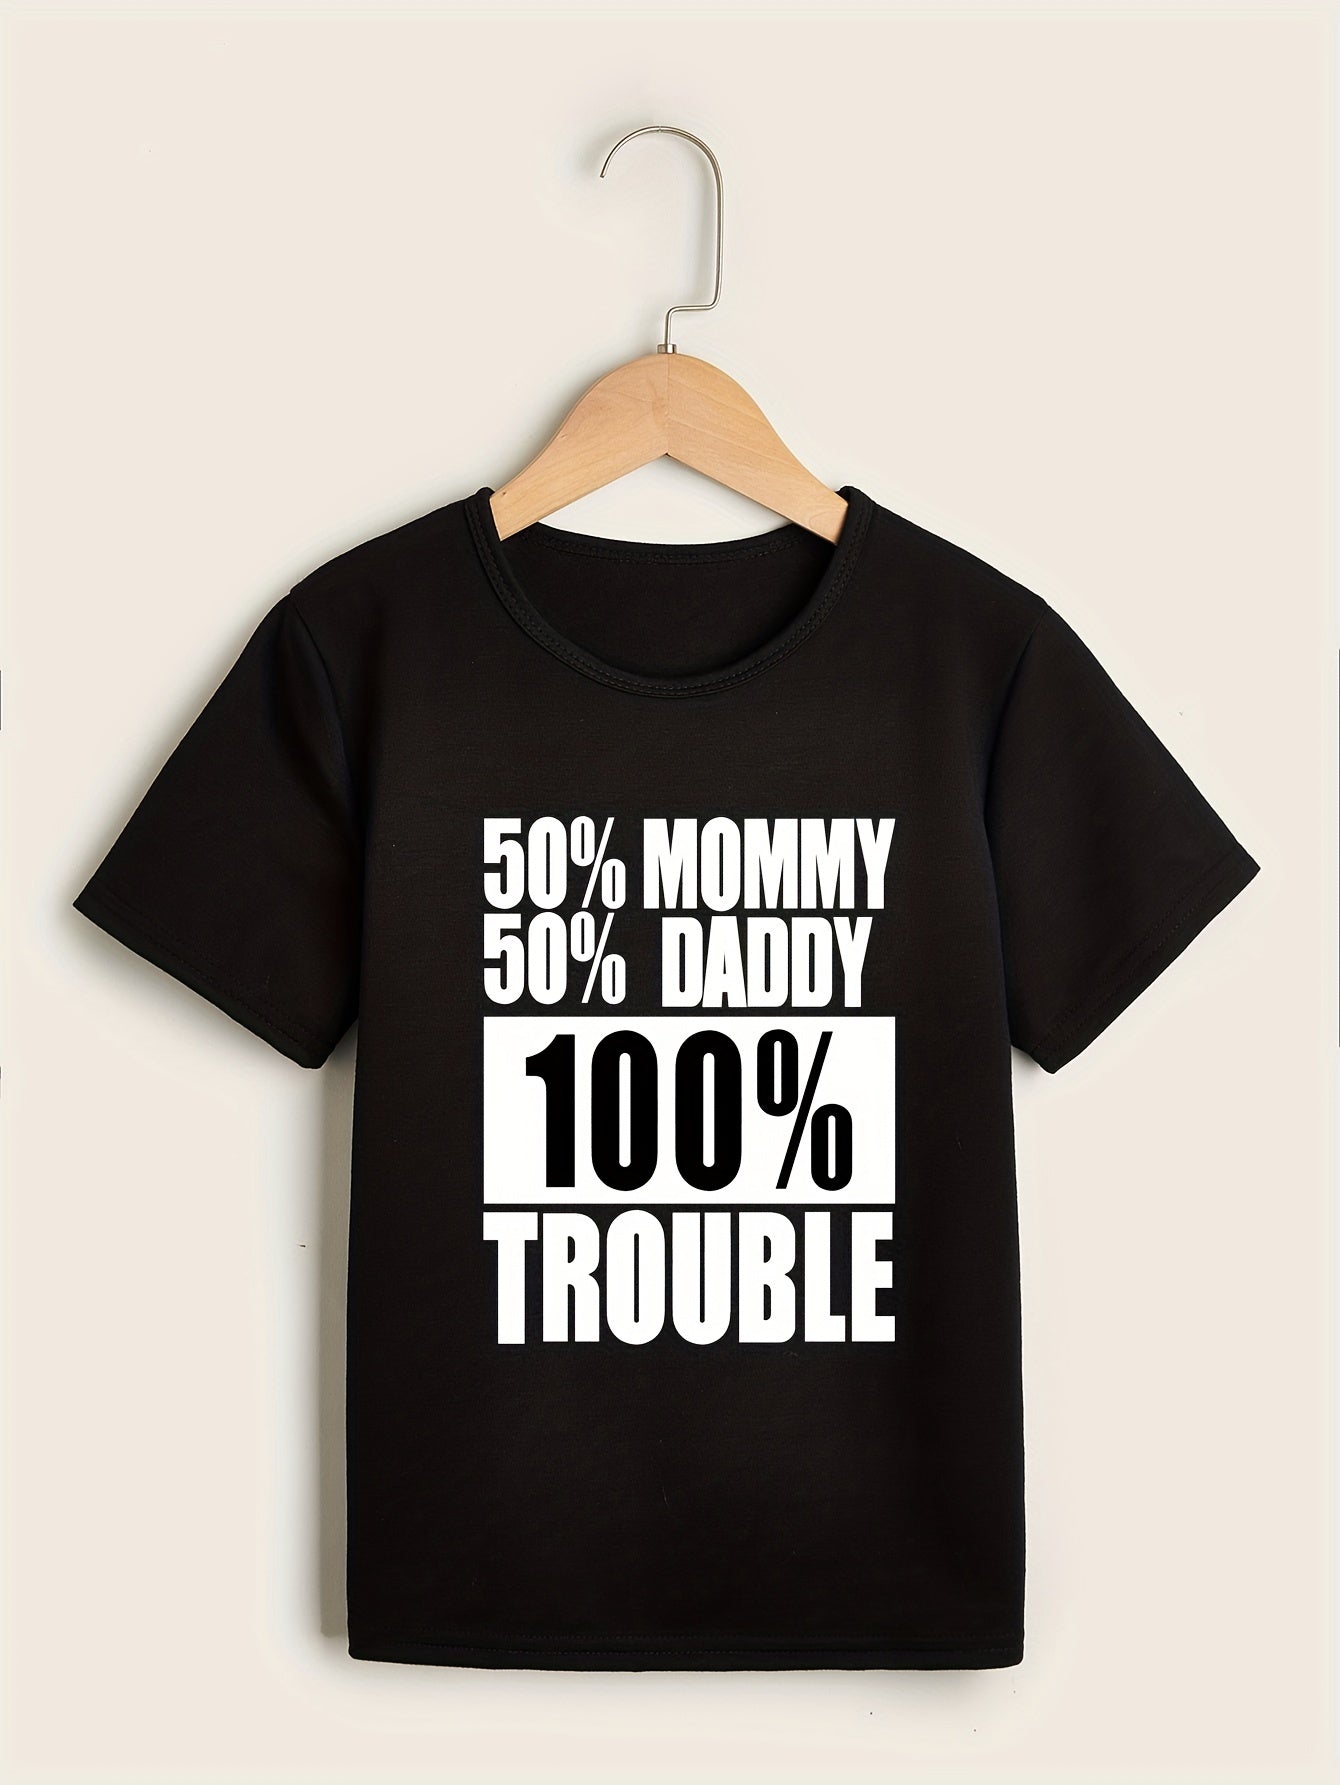 Boys "50% Mommy, 50% Daddy, 100% Trouble" Round Neck T-shirt Tees Tops Casual Soft Comfortable Summer Clothes